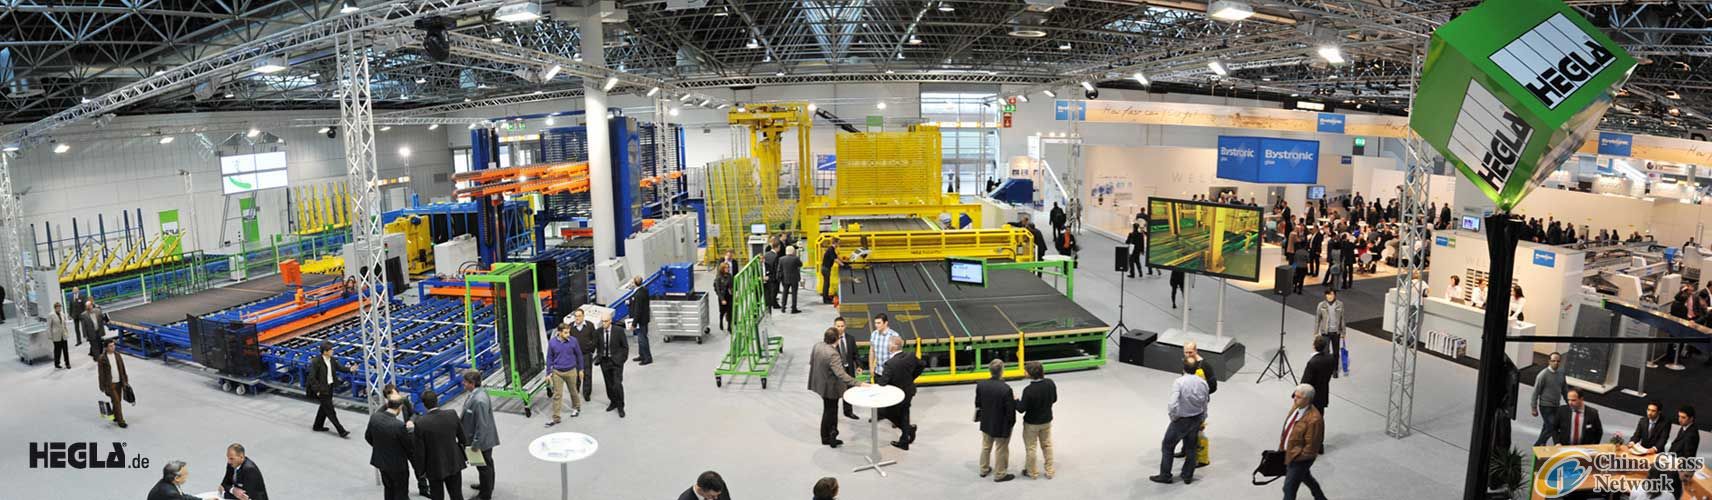 Glasstec 2012: Visitors Attracted by Model Cutting on Laminated Glass and Advanced Float Cutting Lines_1